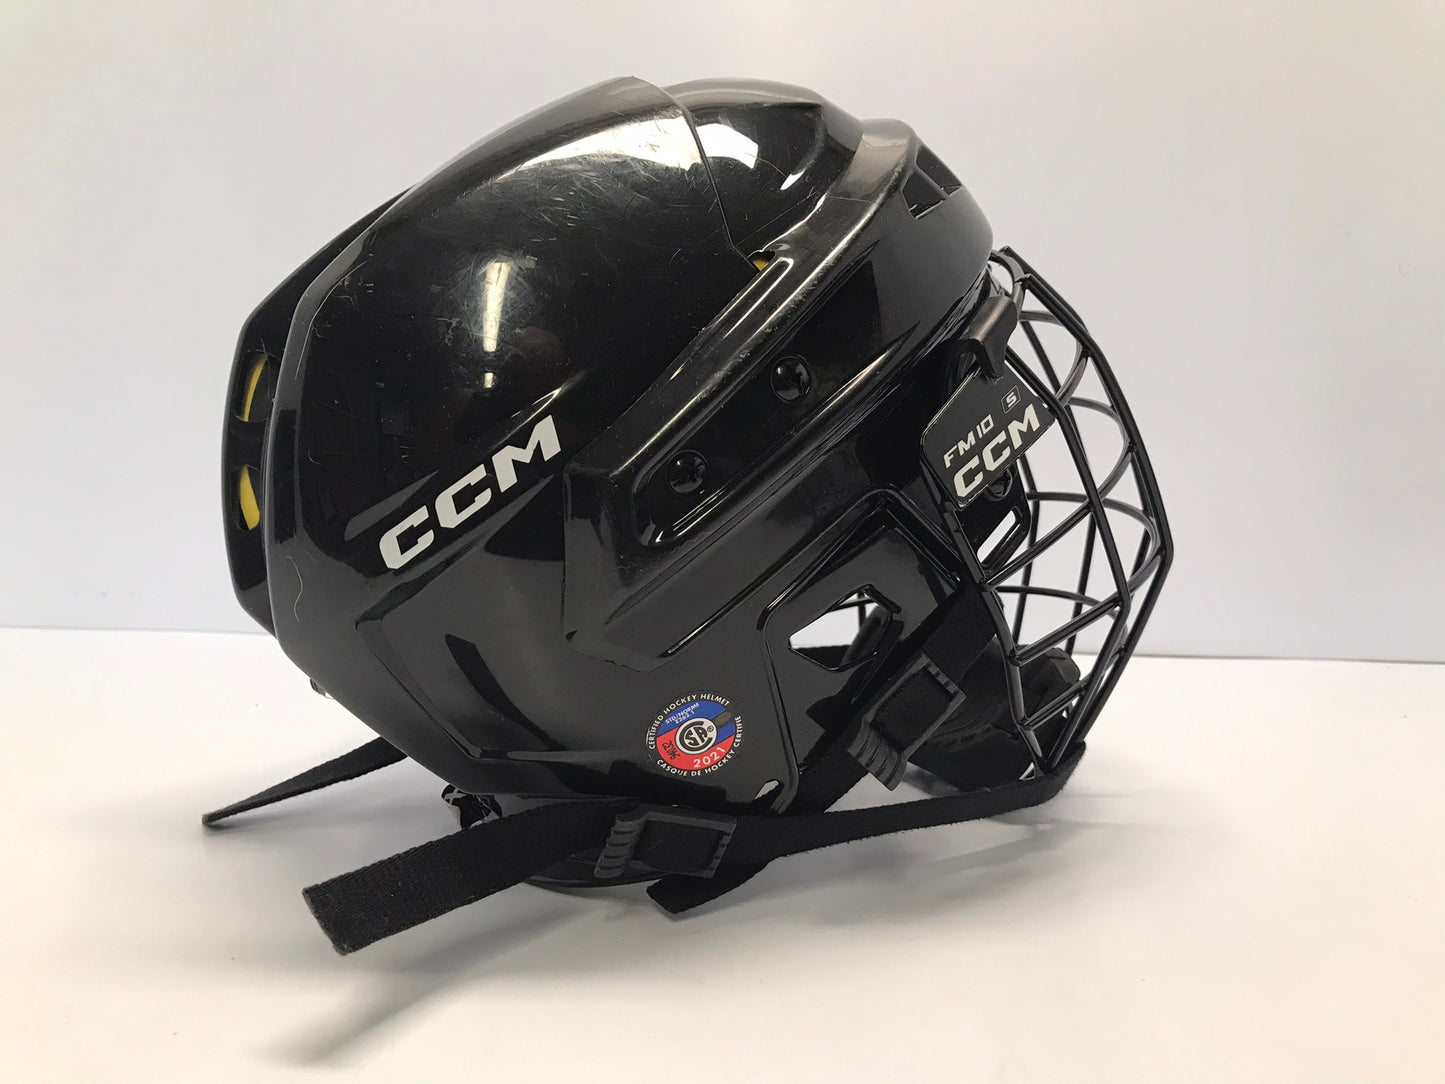 Hockey Helmet Child Size Youth Small Age 4-6 CCM with Cage Manufactured Dec 2021 Expires Dec 2027